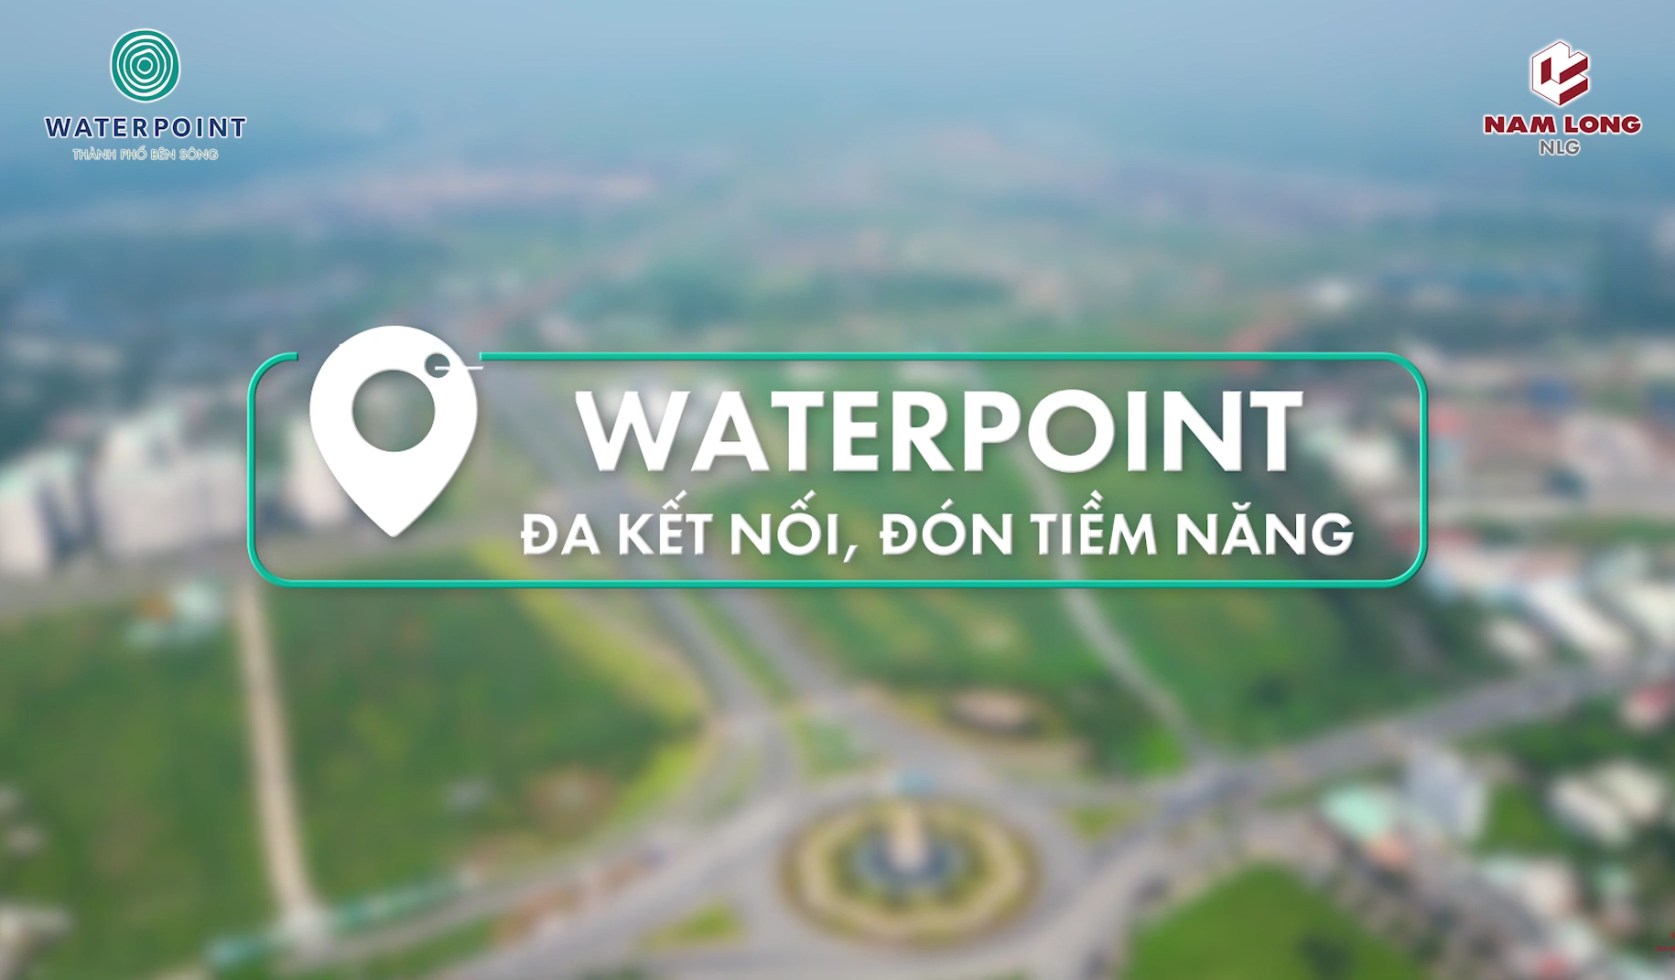 Waterpoint: Multiple connections, embracing potential